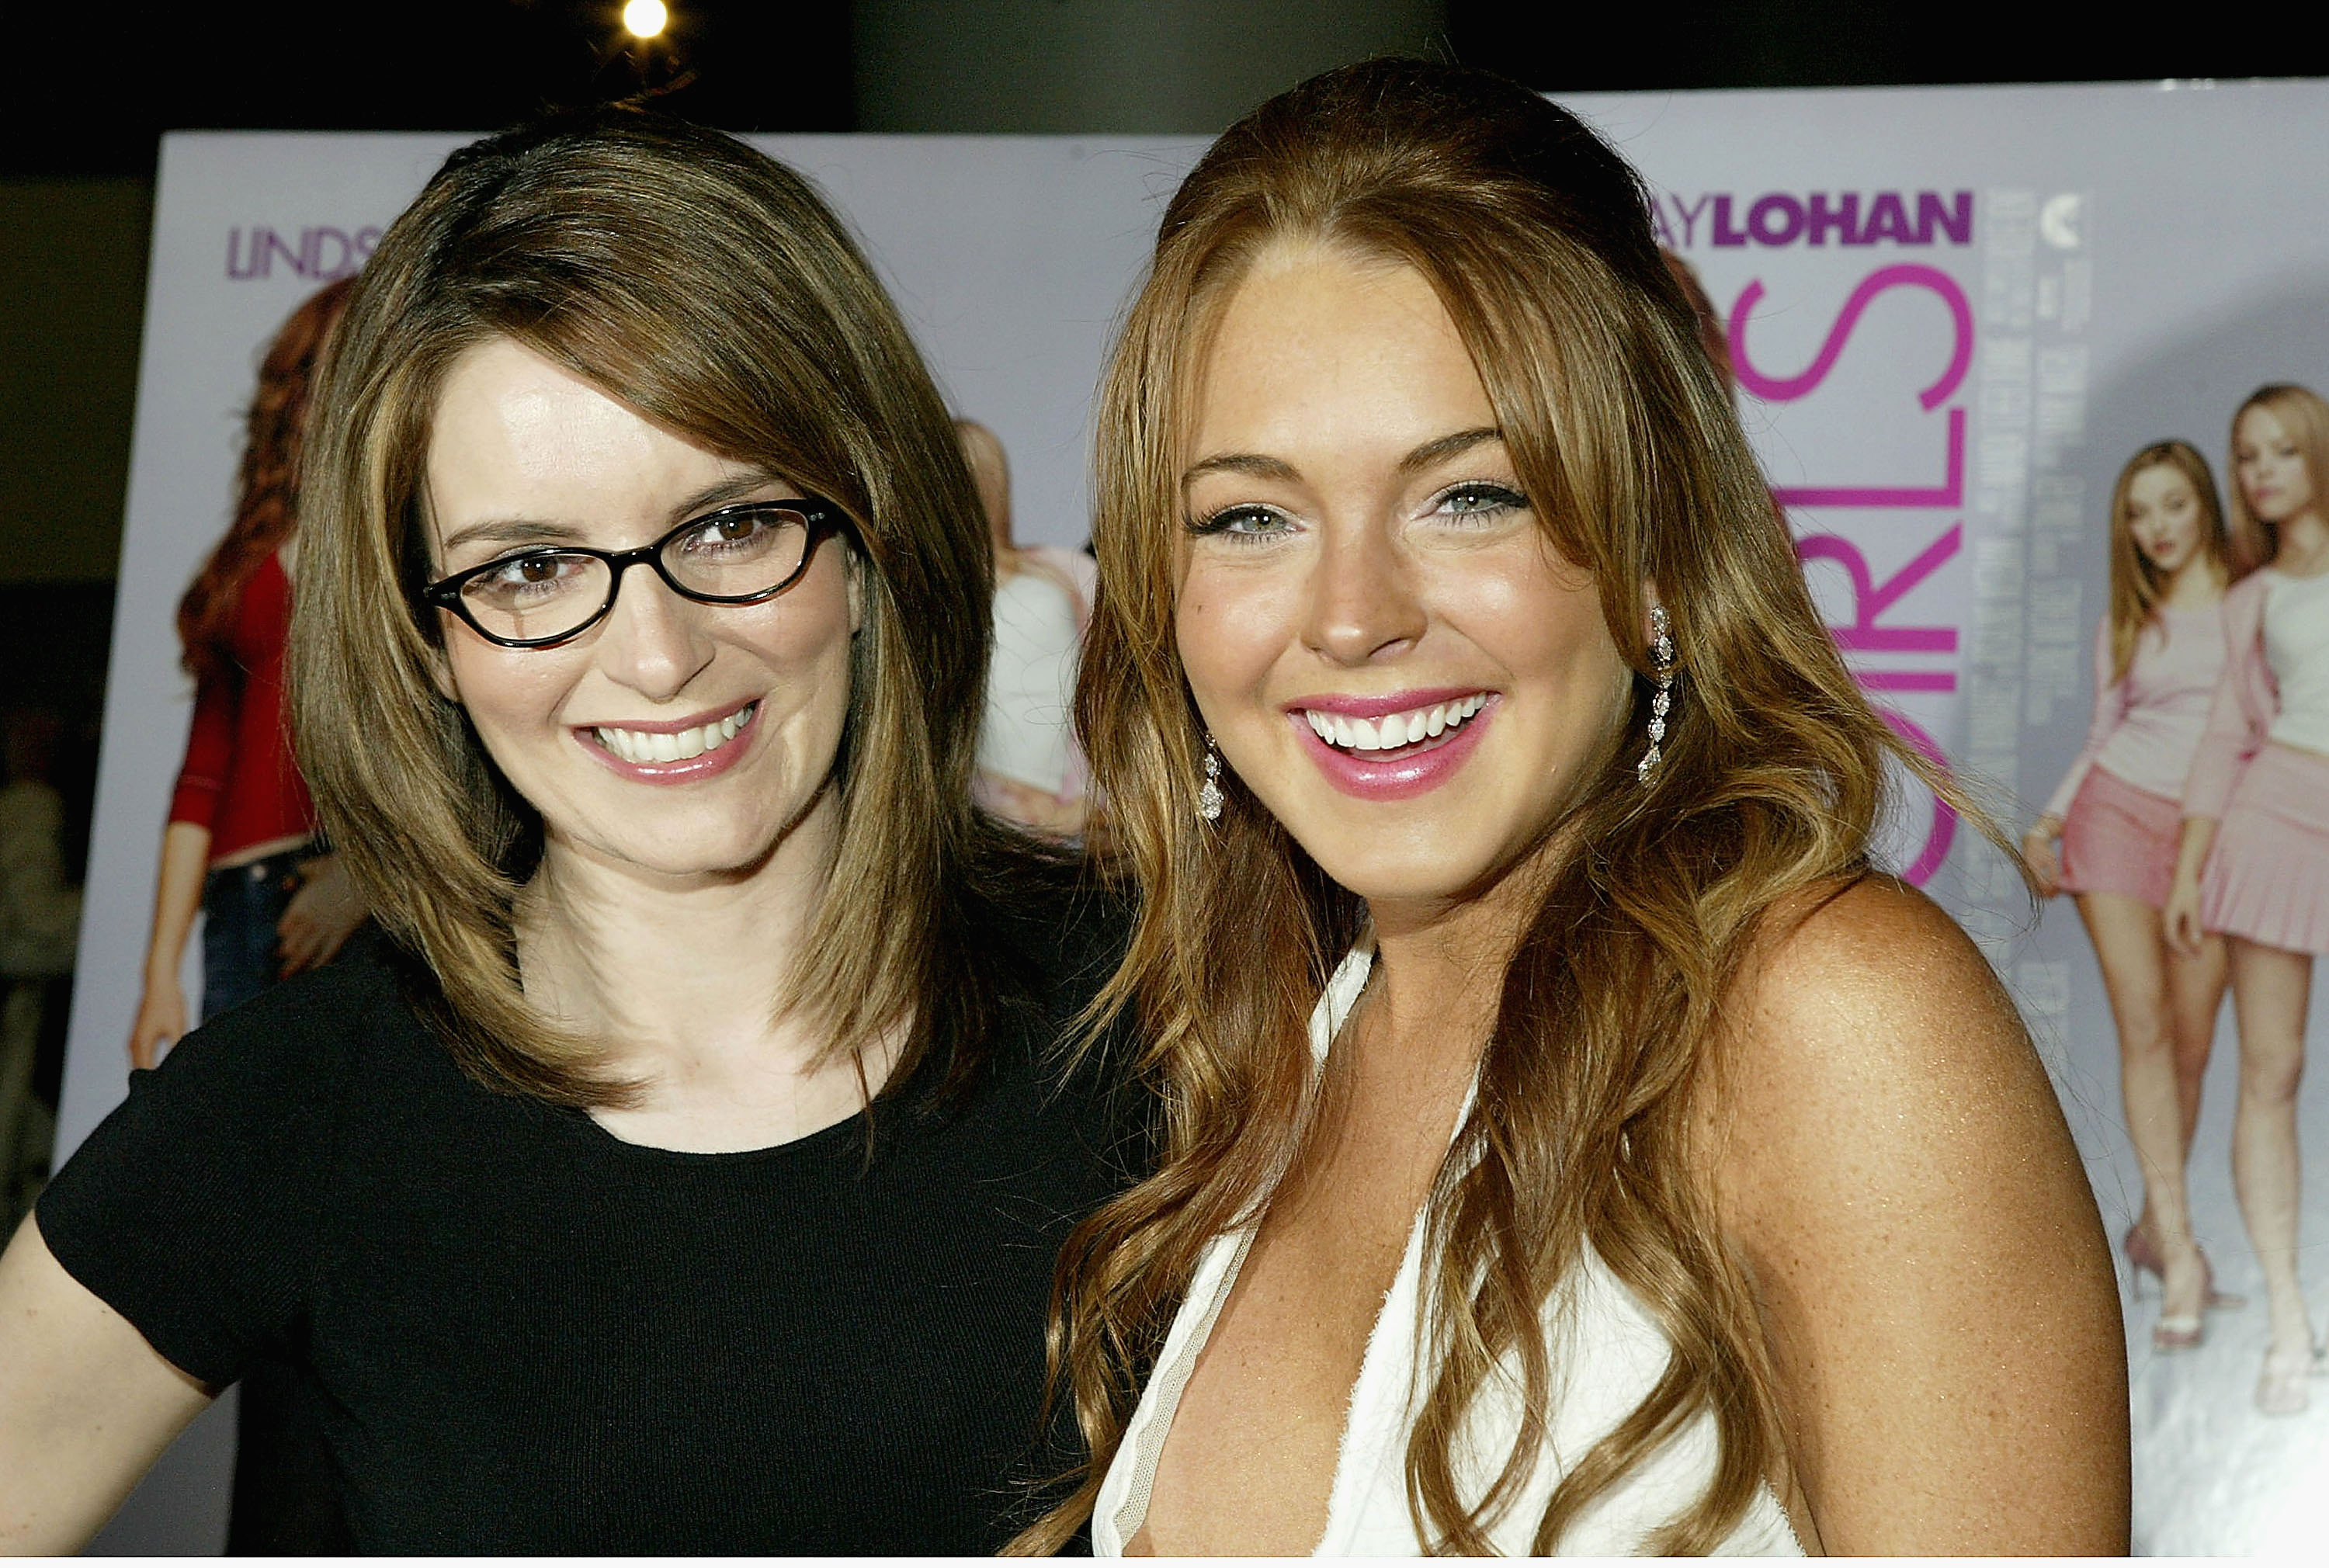 Comedian/writer Tina Fey and actress Lindsay Lohan attend a private screening of "Mean Girls" on April 23, 2004 at Loews Lincoln Square Theater, in New York City. (Paul Hawthorne/Getty Images)